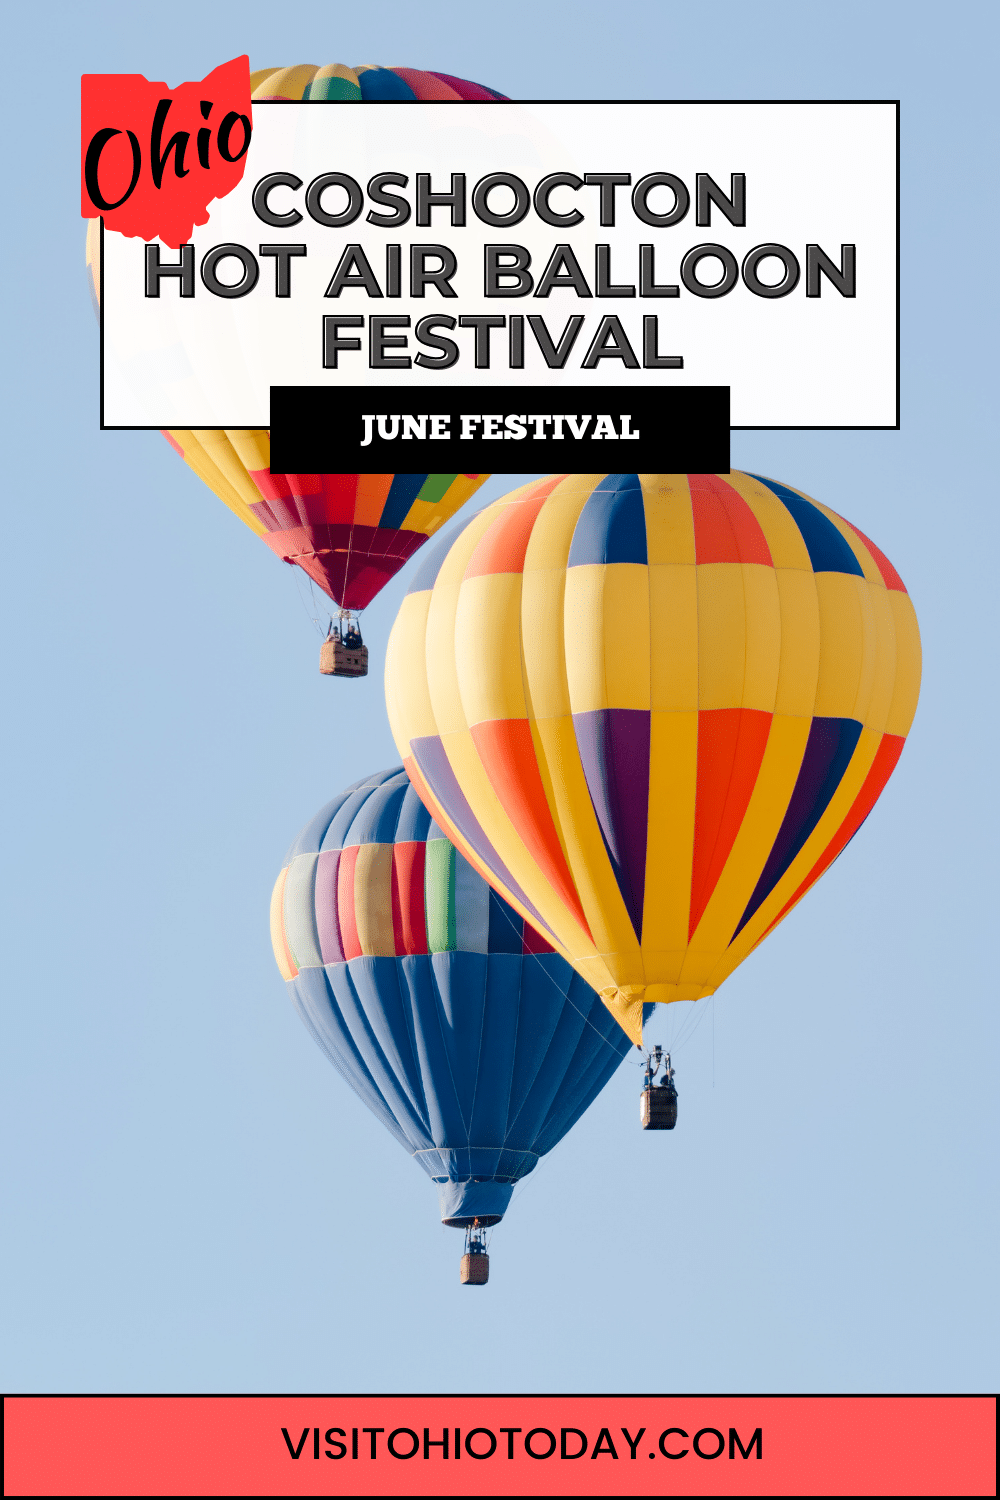 The Coshocton Hot Air Balloon Festival is in its 40th year celebrating hot air balloons. It will take place in early June at the Coshocton County Fairgrounds.